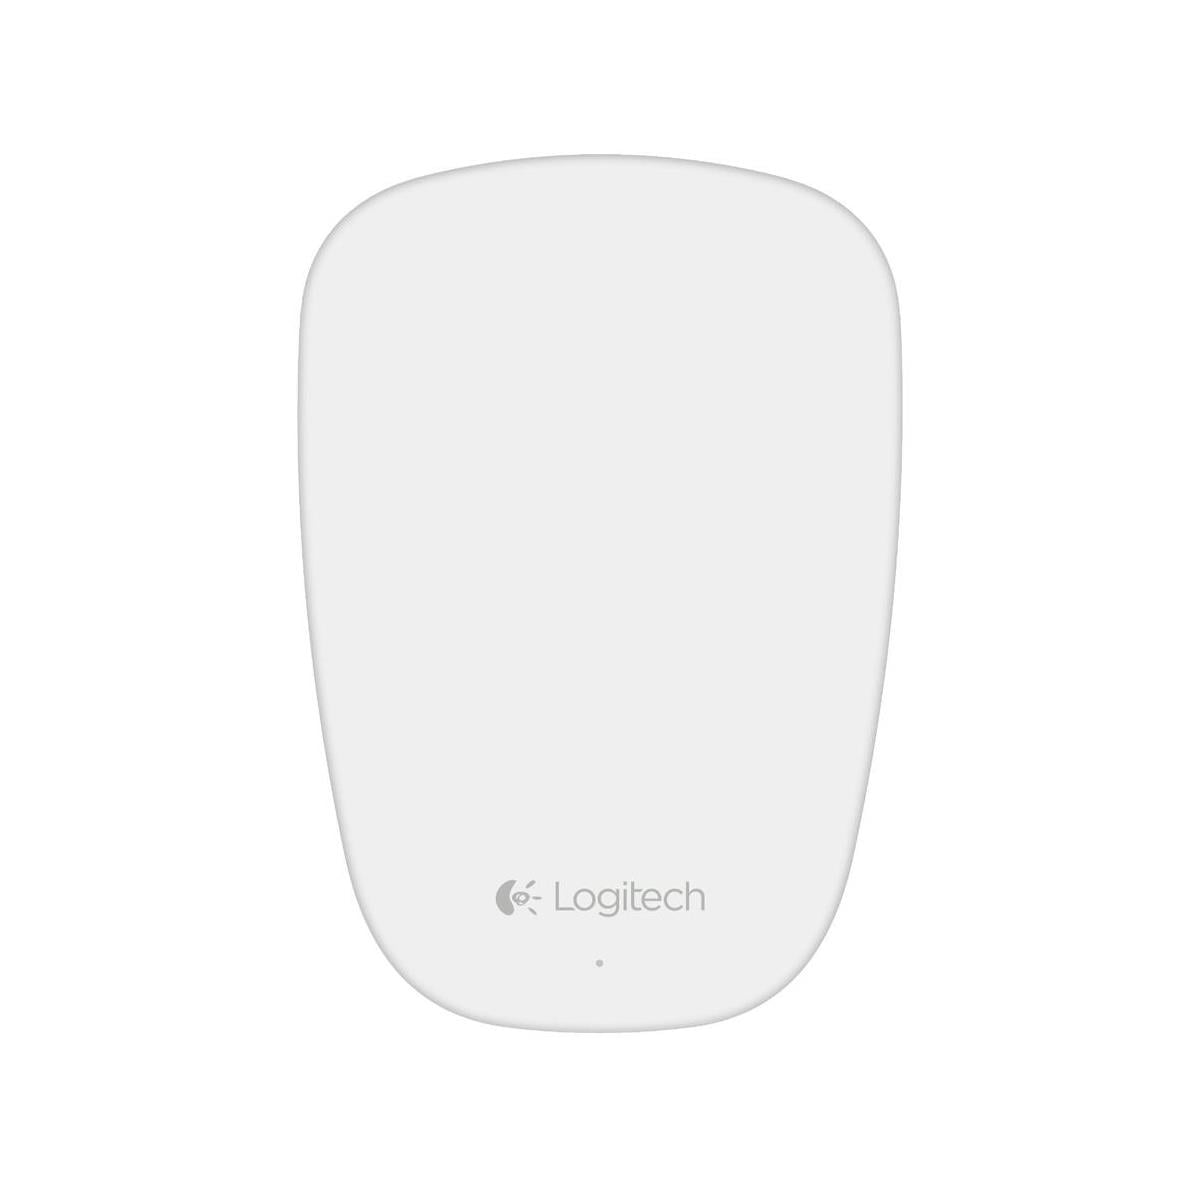 Logitech Ultrathin Mouse T631 for Mac (Non-Retail Packaging)